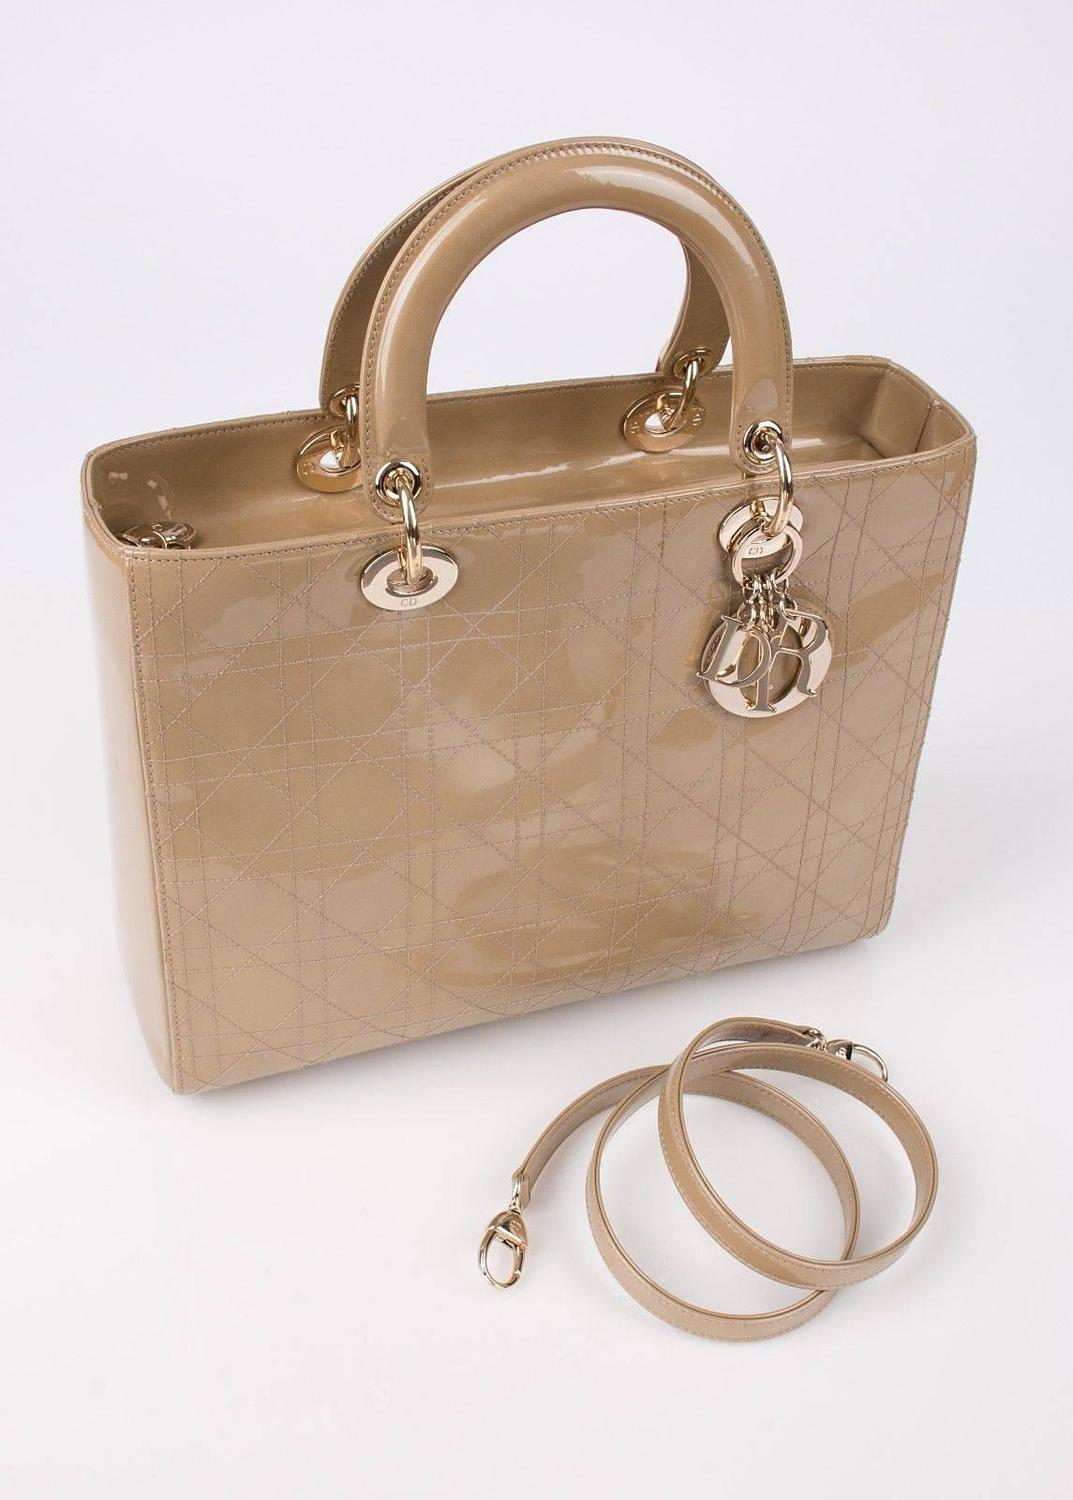 CHRISTIAN DIOR &quot;Lady&quot; Sand / Beige Patent Leather Handbag Tote Purse + Strap For Sale at 1stdibs